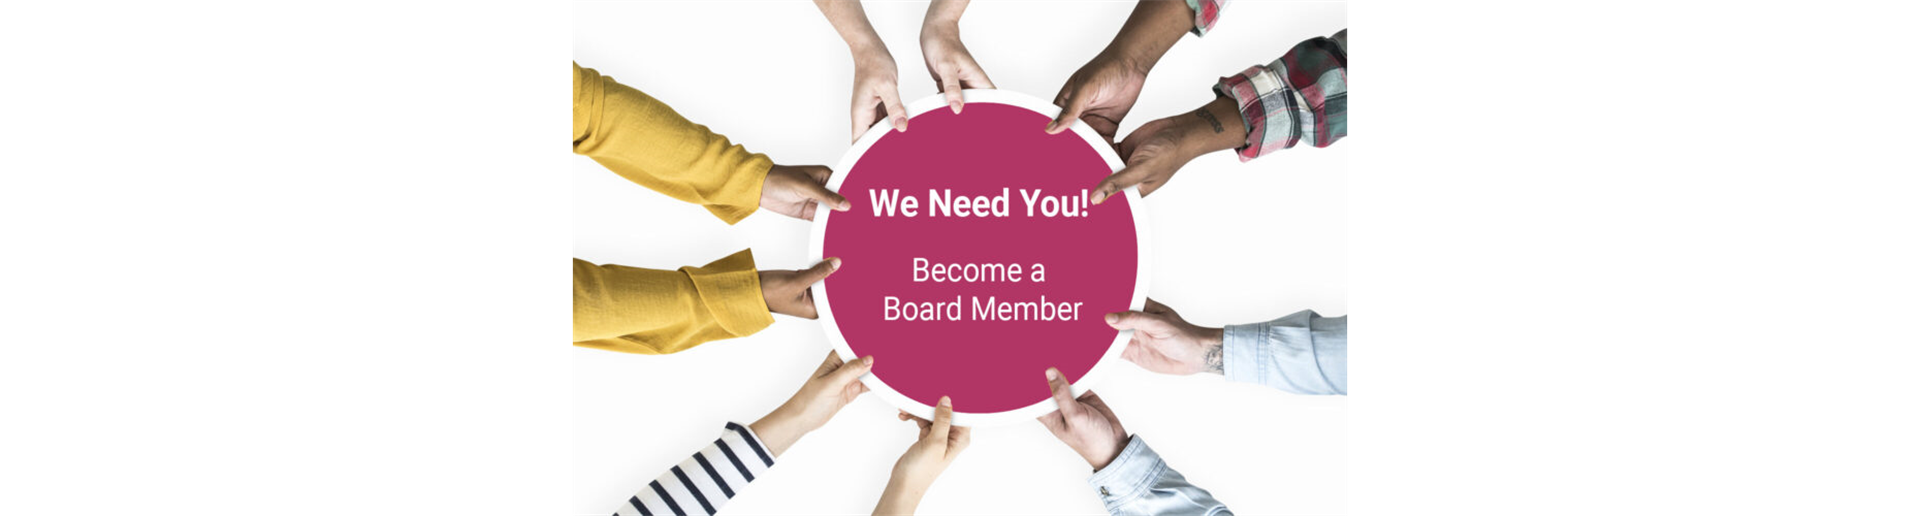 Join our Board! 